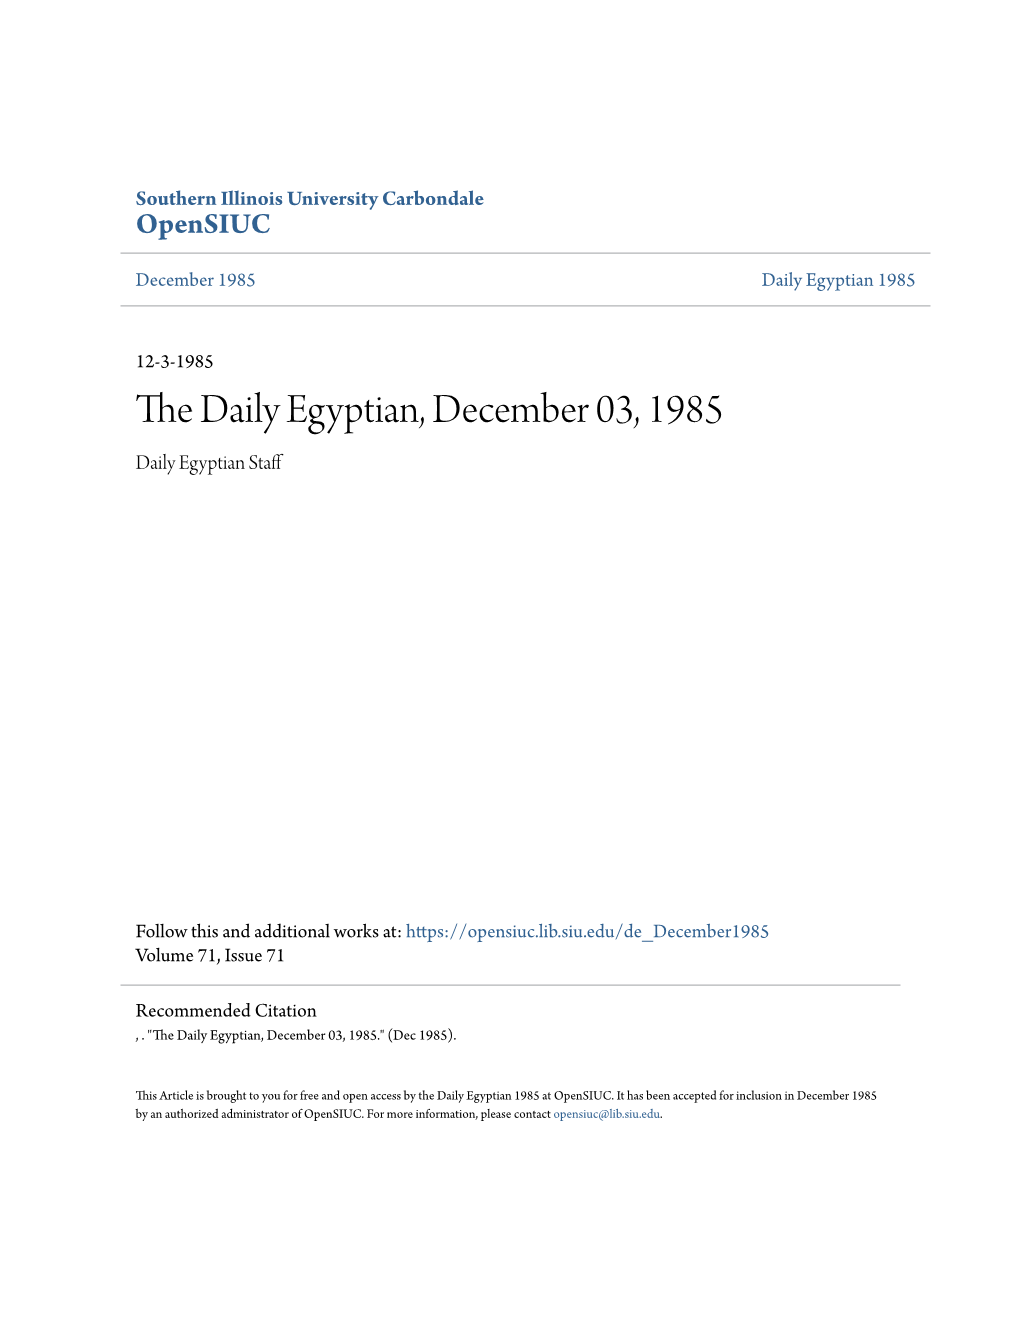 The Daily Egyptian, December 03, 1985